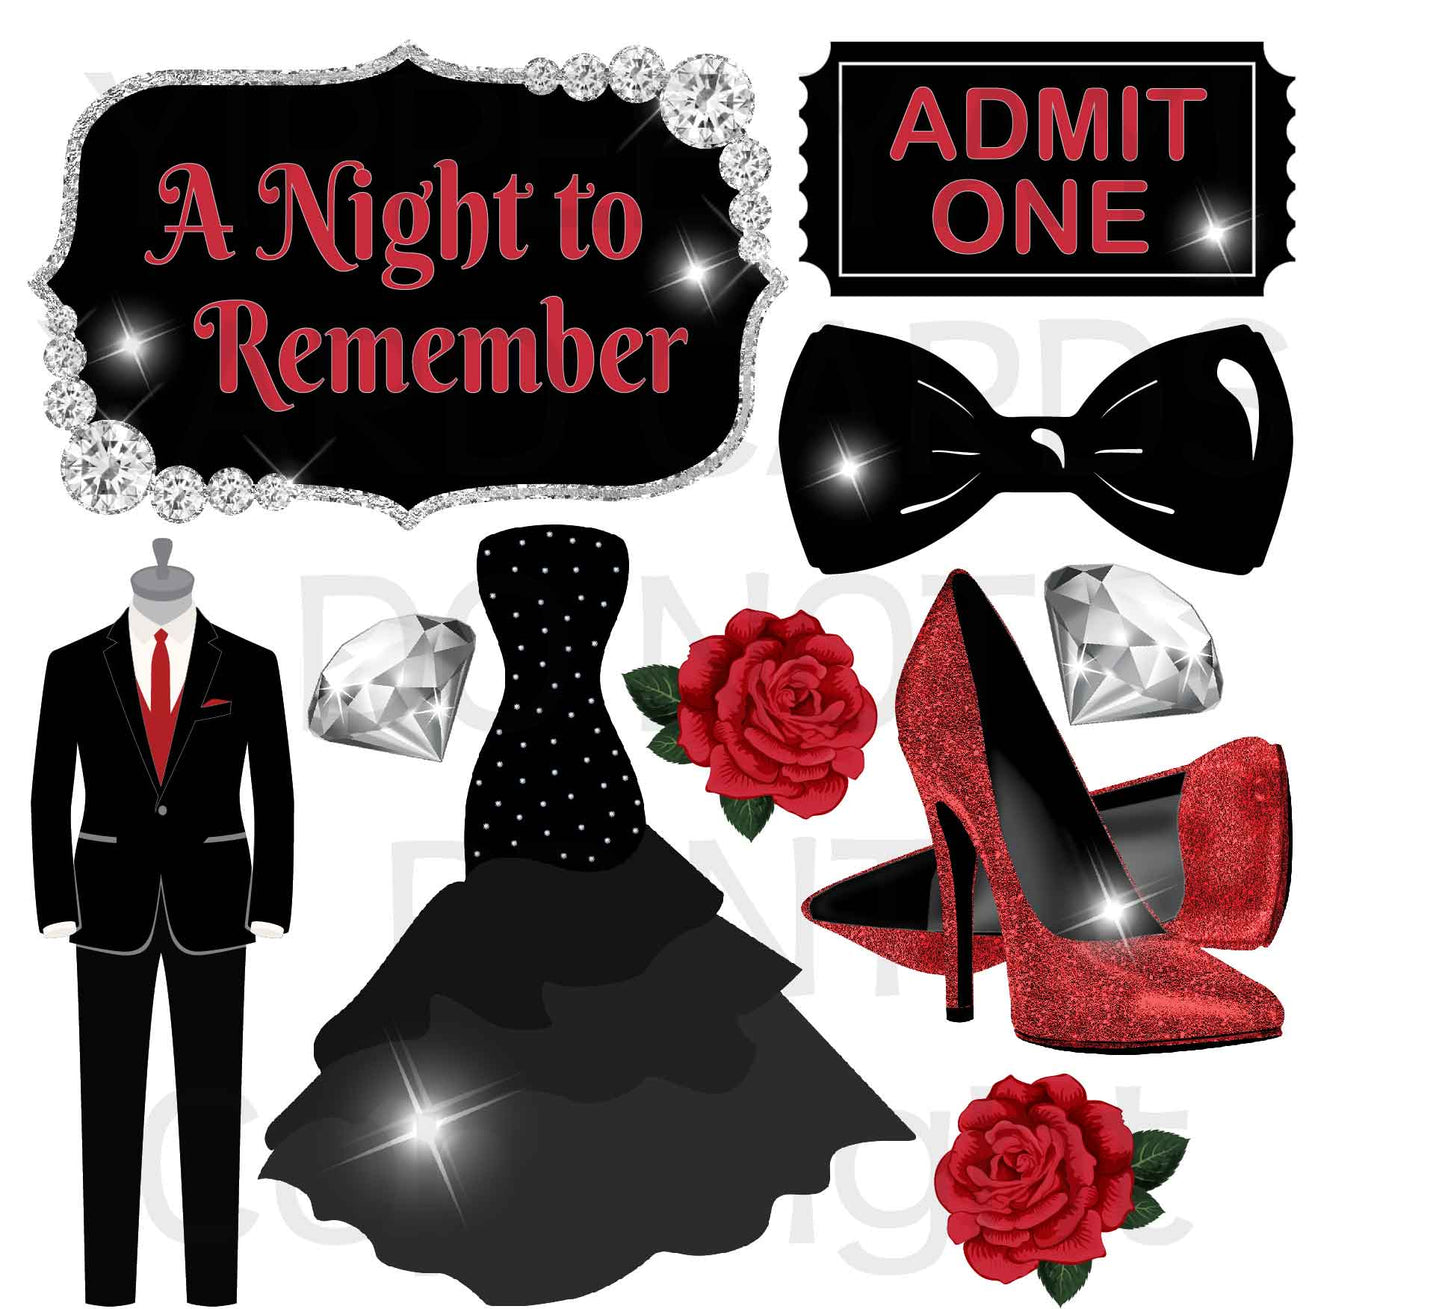 A Night to Remember - Red and Black - Theme Half Sheet Misc. (Must Purchase 2 Half sheets - You Can Mix & Match)